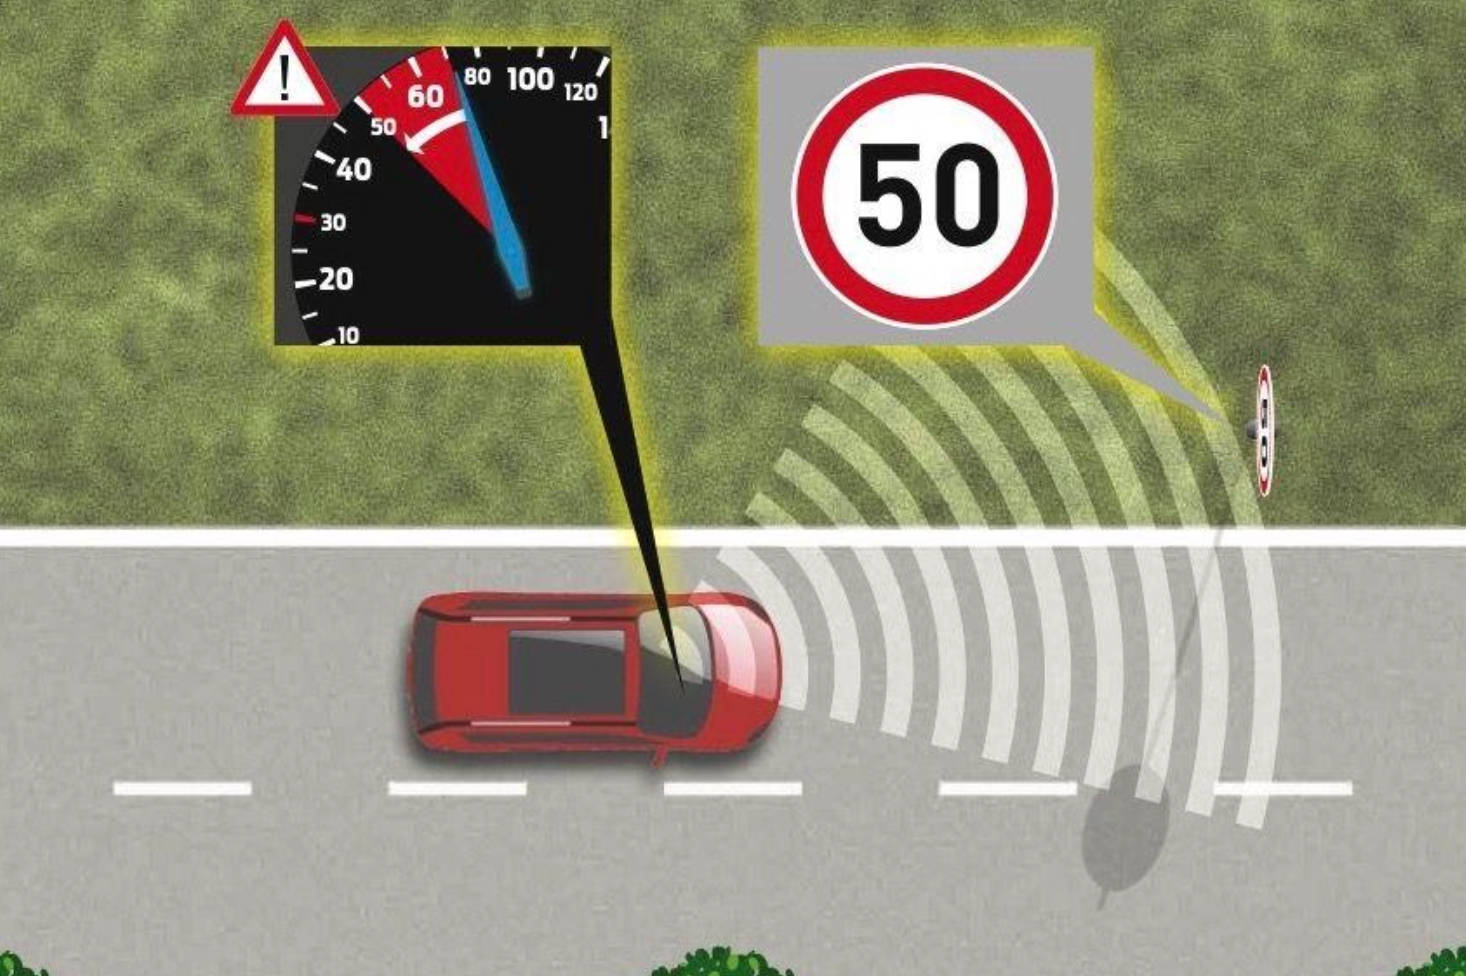 Will Intelligent Speed Assist (ISA) technology be coming to the UK soon?